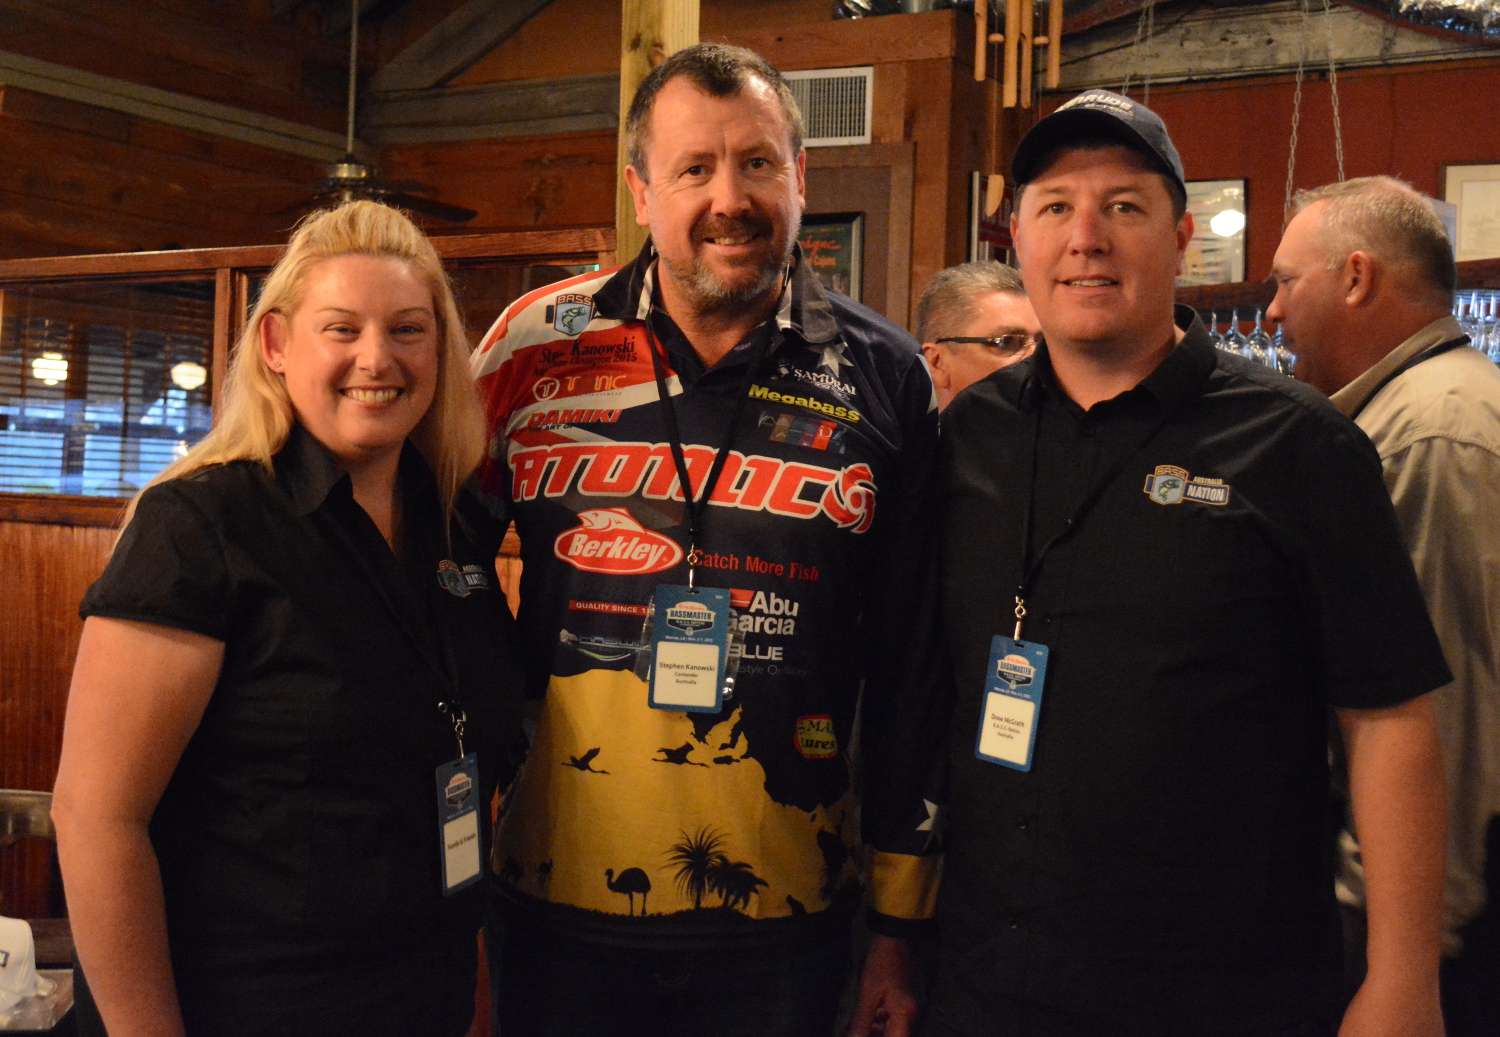 Team Australia is at the championship for the second time. Lauren Kelly, left, and Drew McGrath, right, are part of the new chapter's leadership, and Steve Kanowski, center, won Australia's championship and is the country's representative.